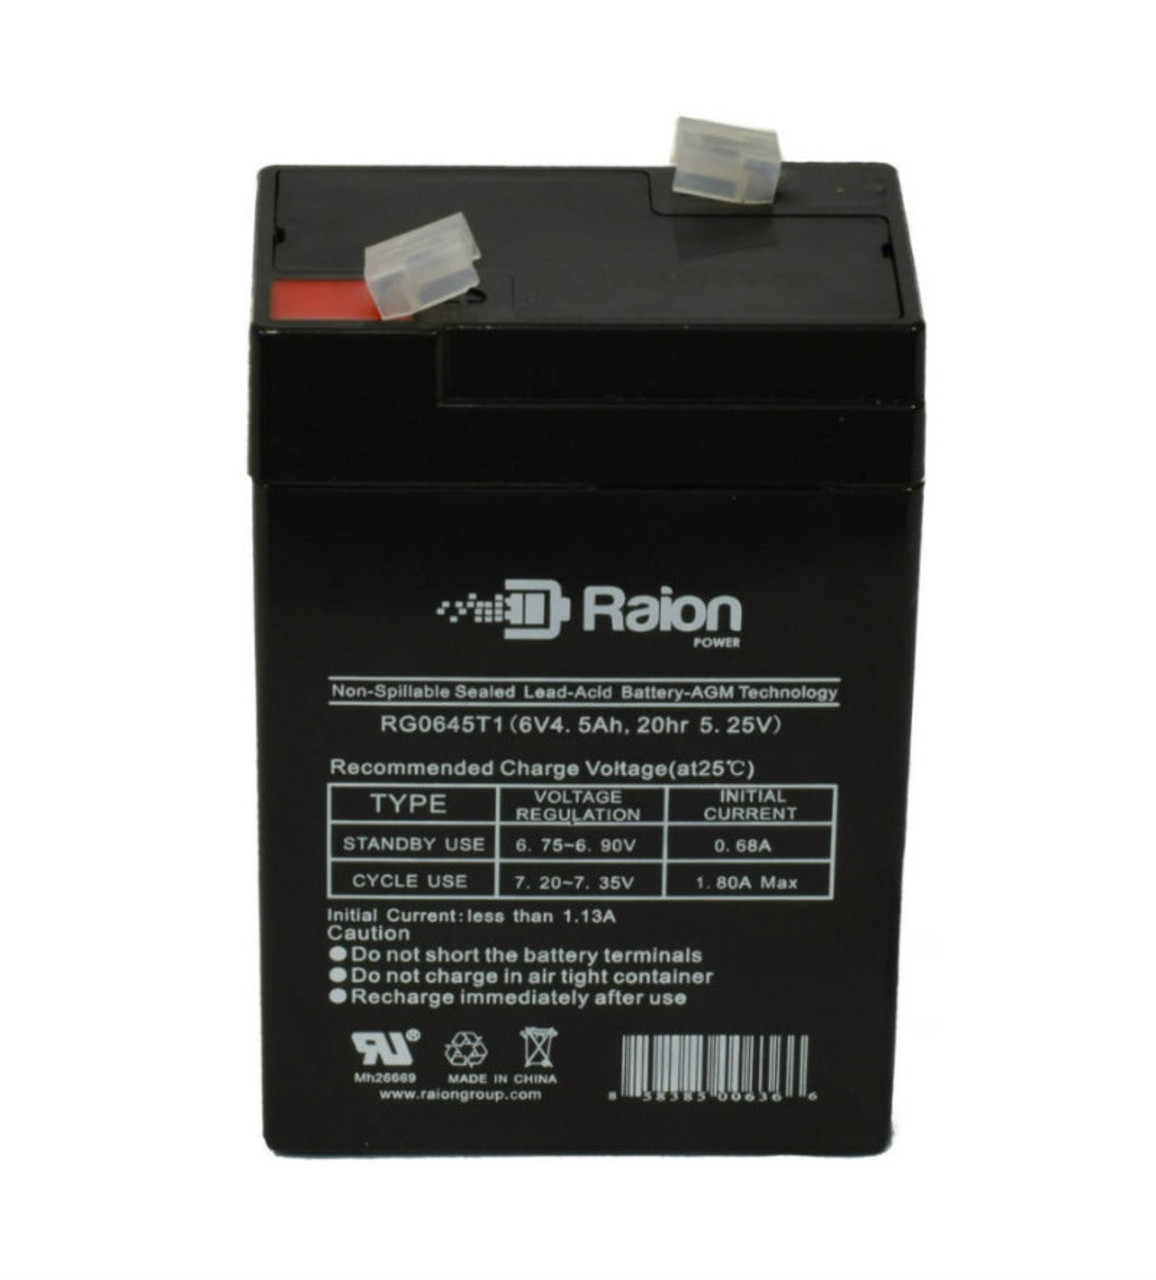 Raion Power RG0645T1 Replacement Battery Cartridge for Nellcor N-1000 Multi Function Monitor